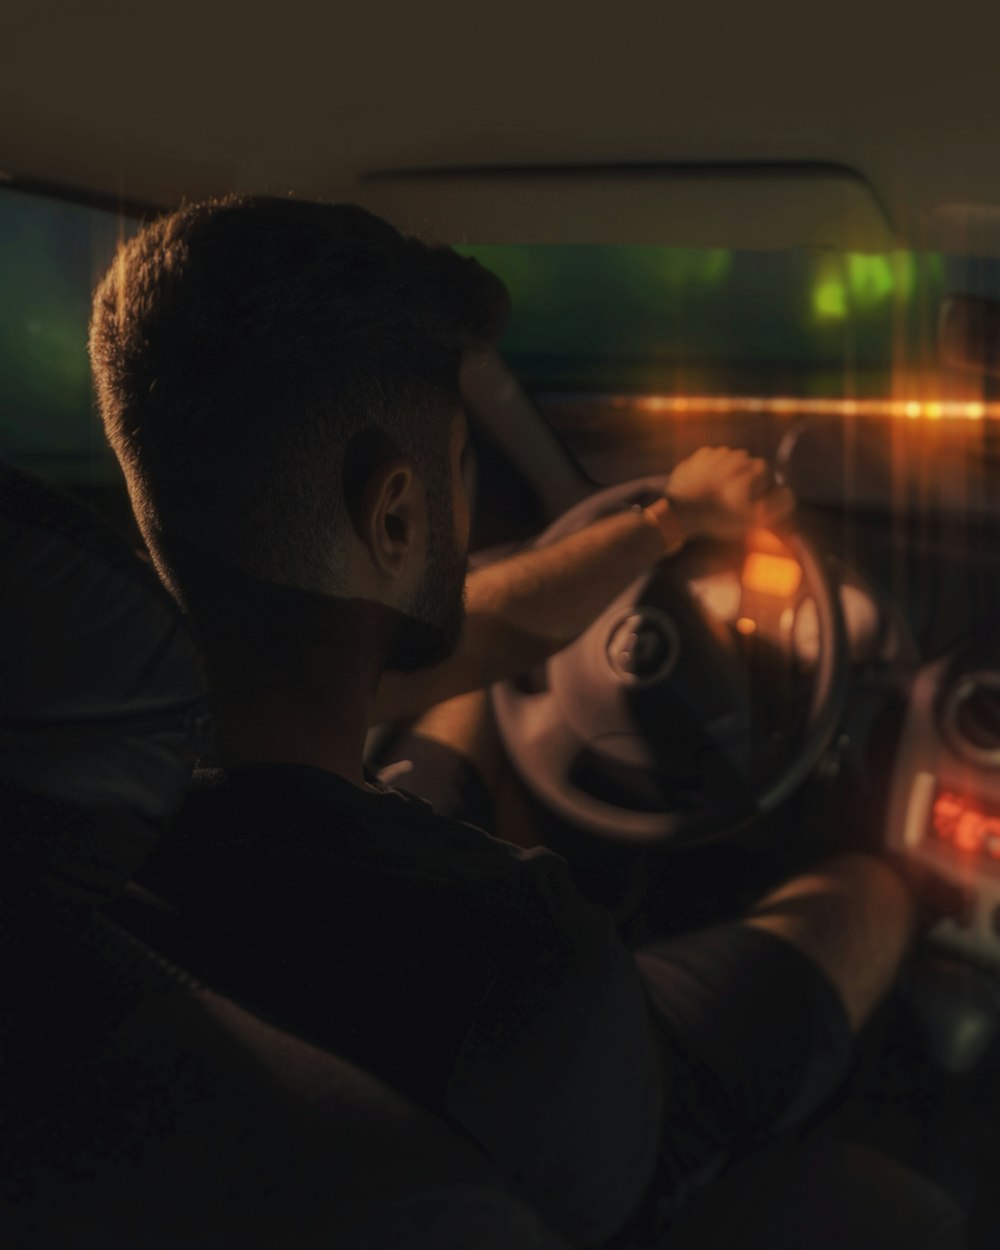 a man sitting in a car holding a steering wheel